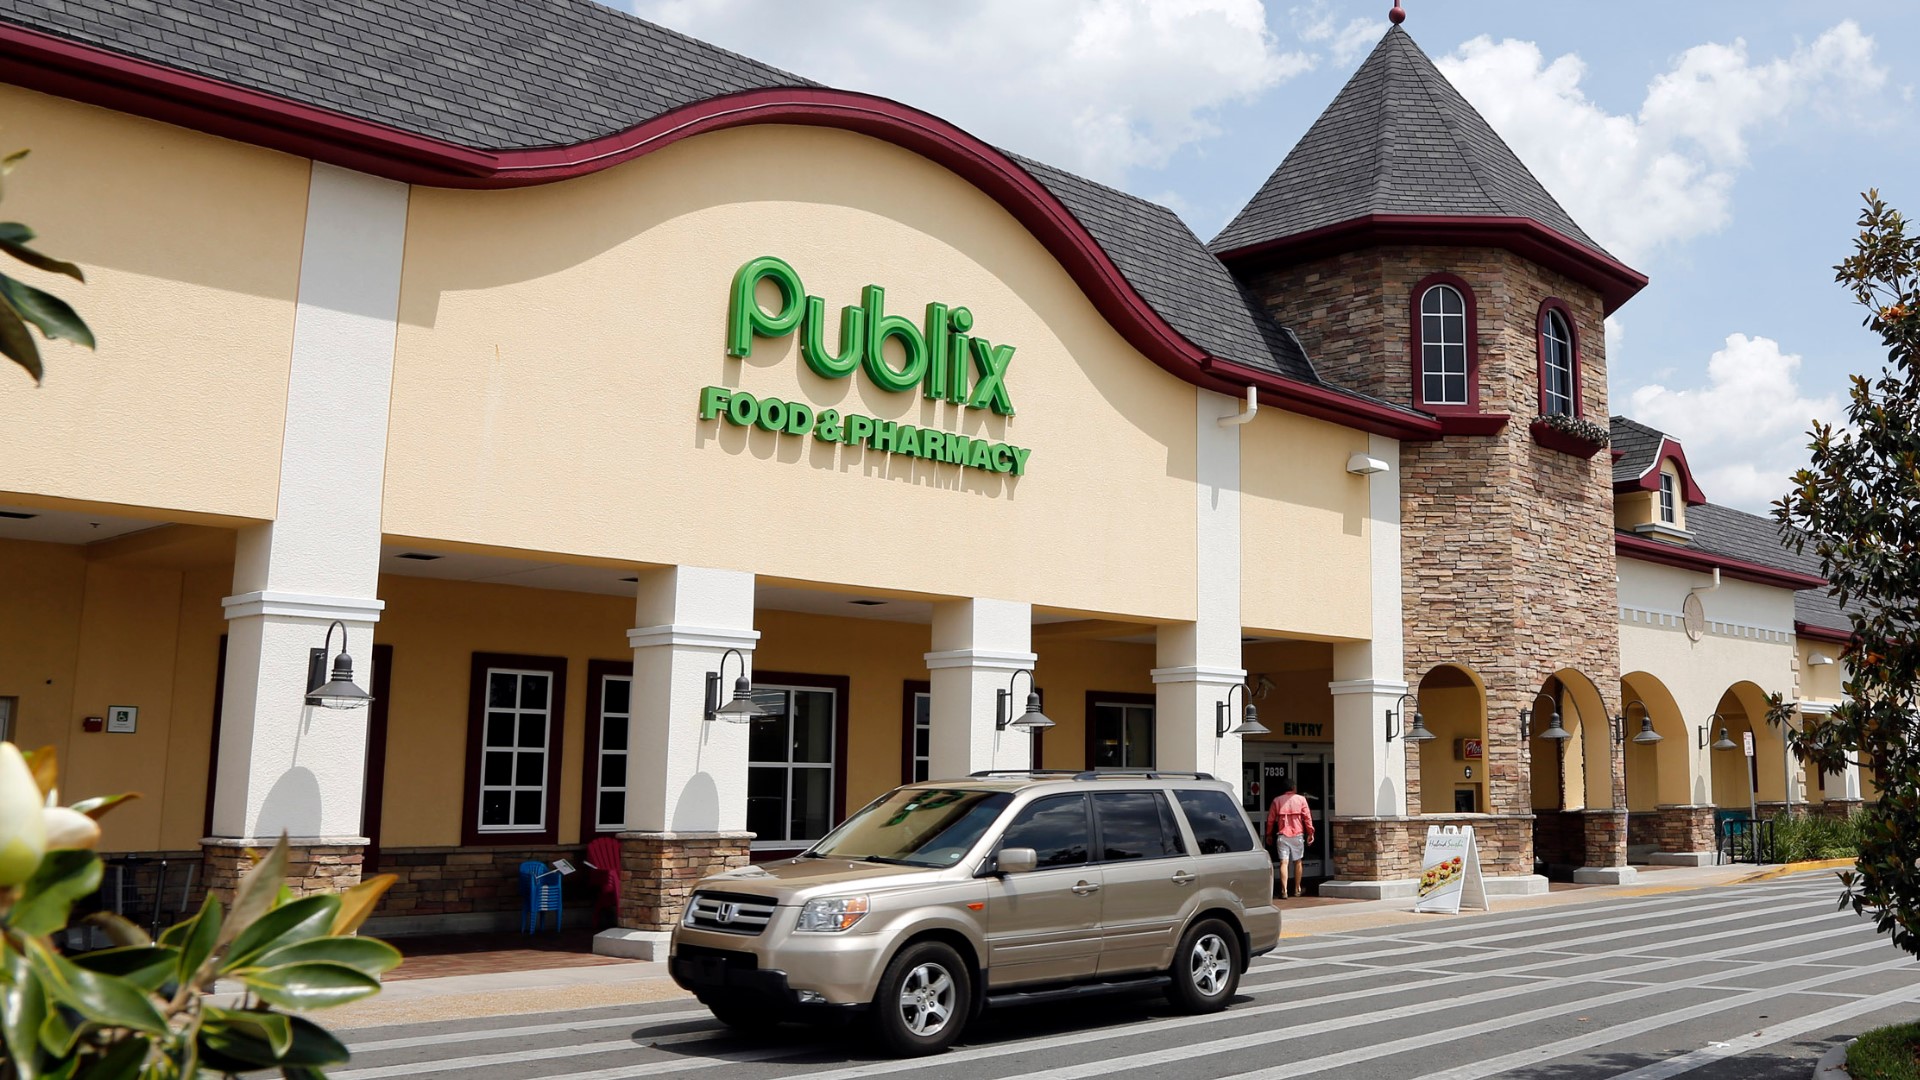 Publix did not release any identifying information about the employee's roles or the number of employees who tested positive.